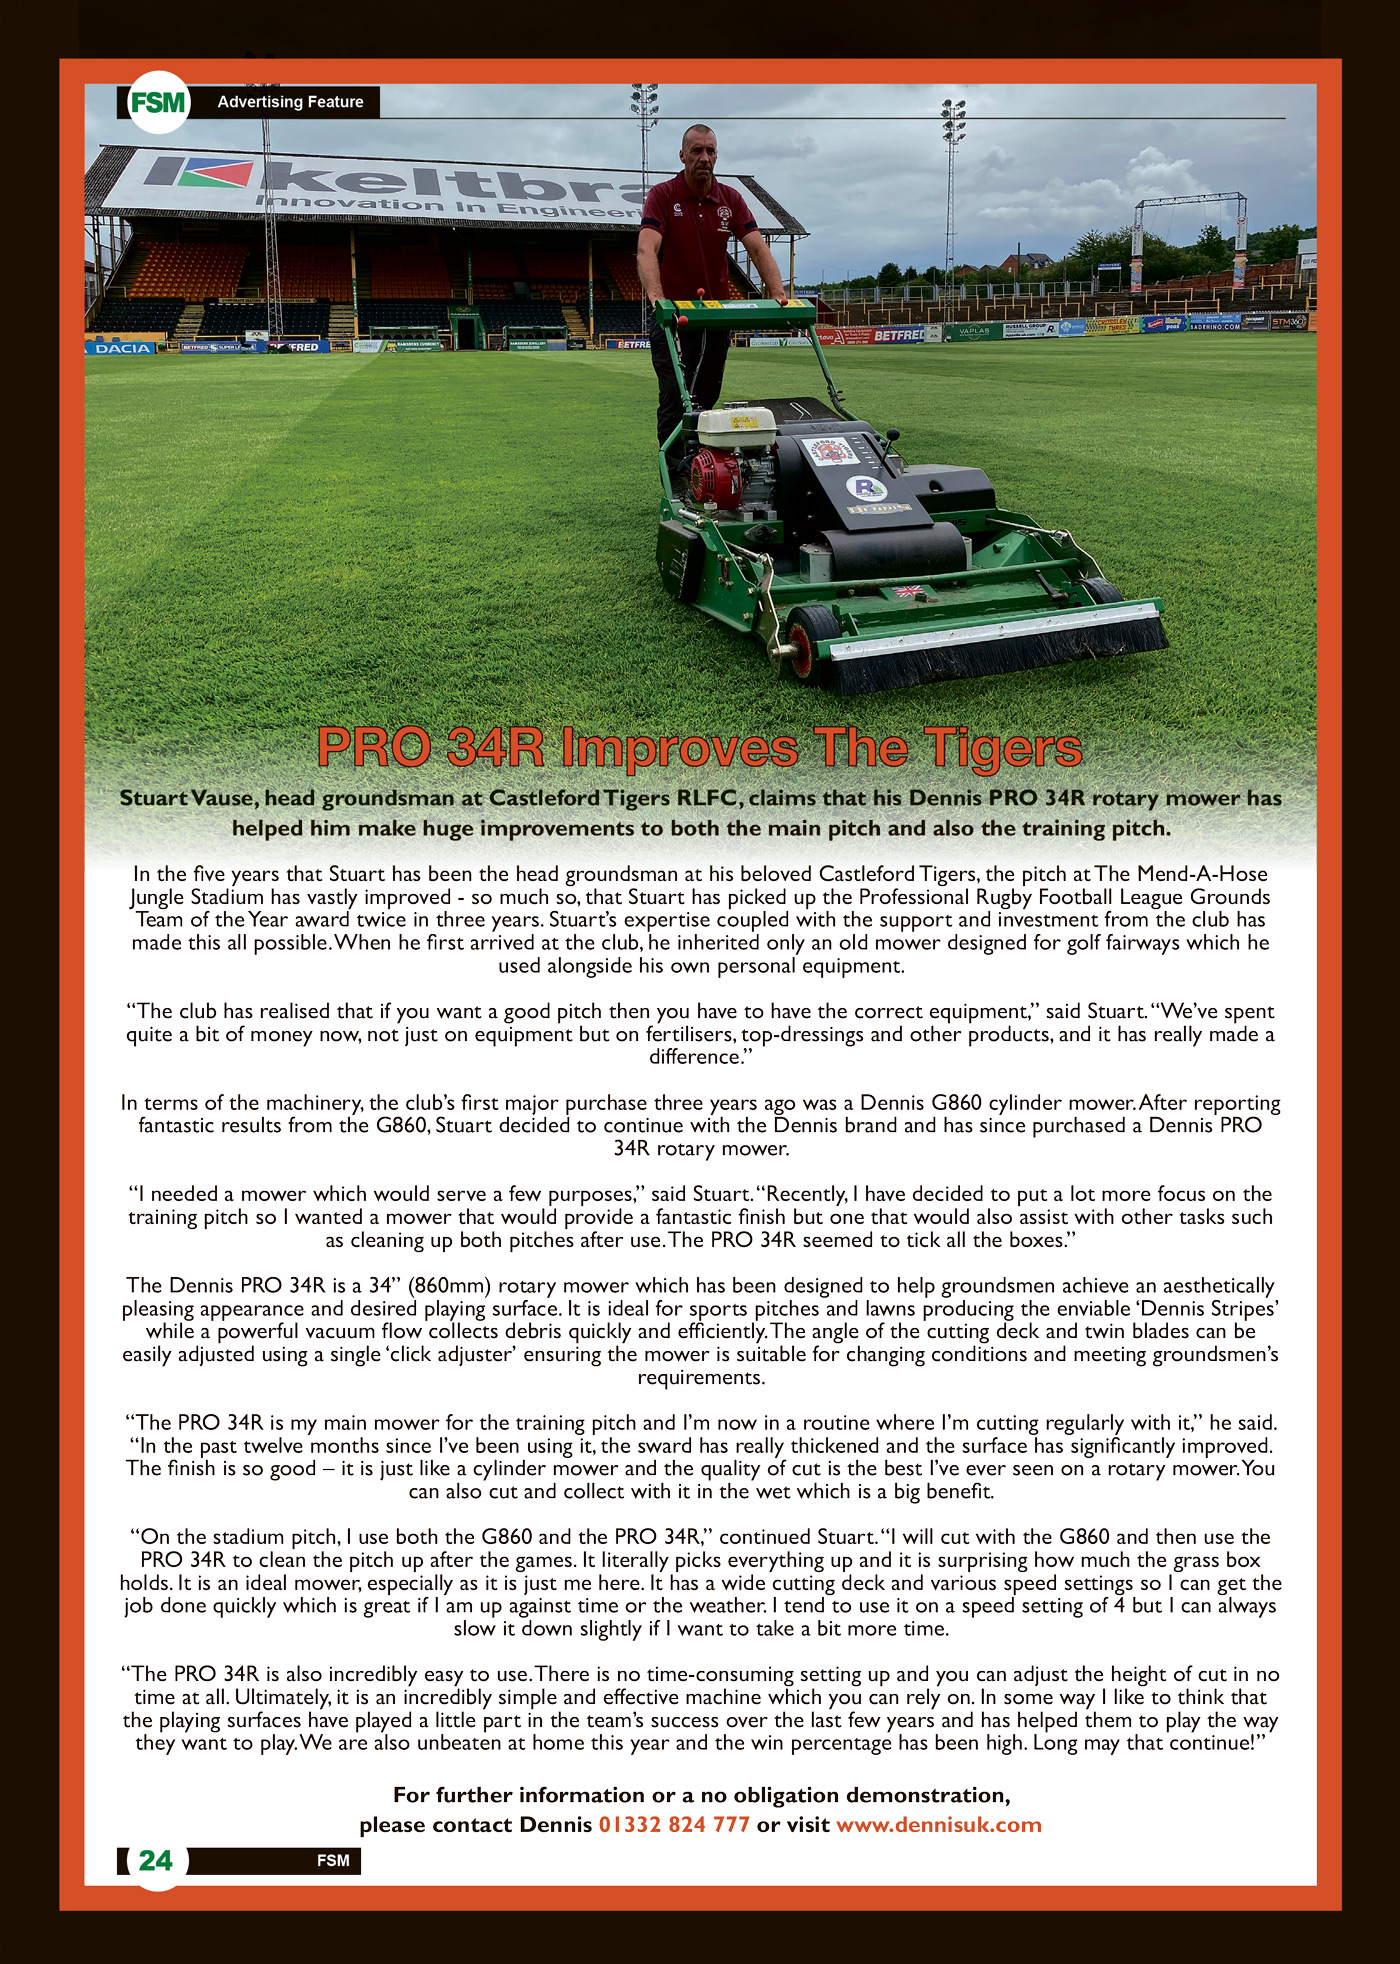 Dennis PRO 34R Improves The Tigers